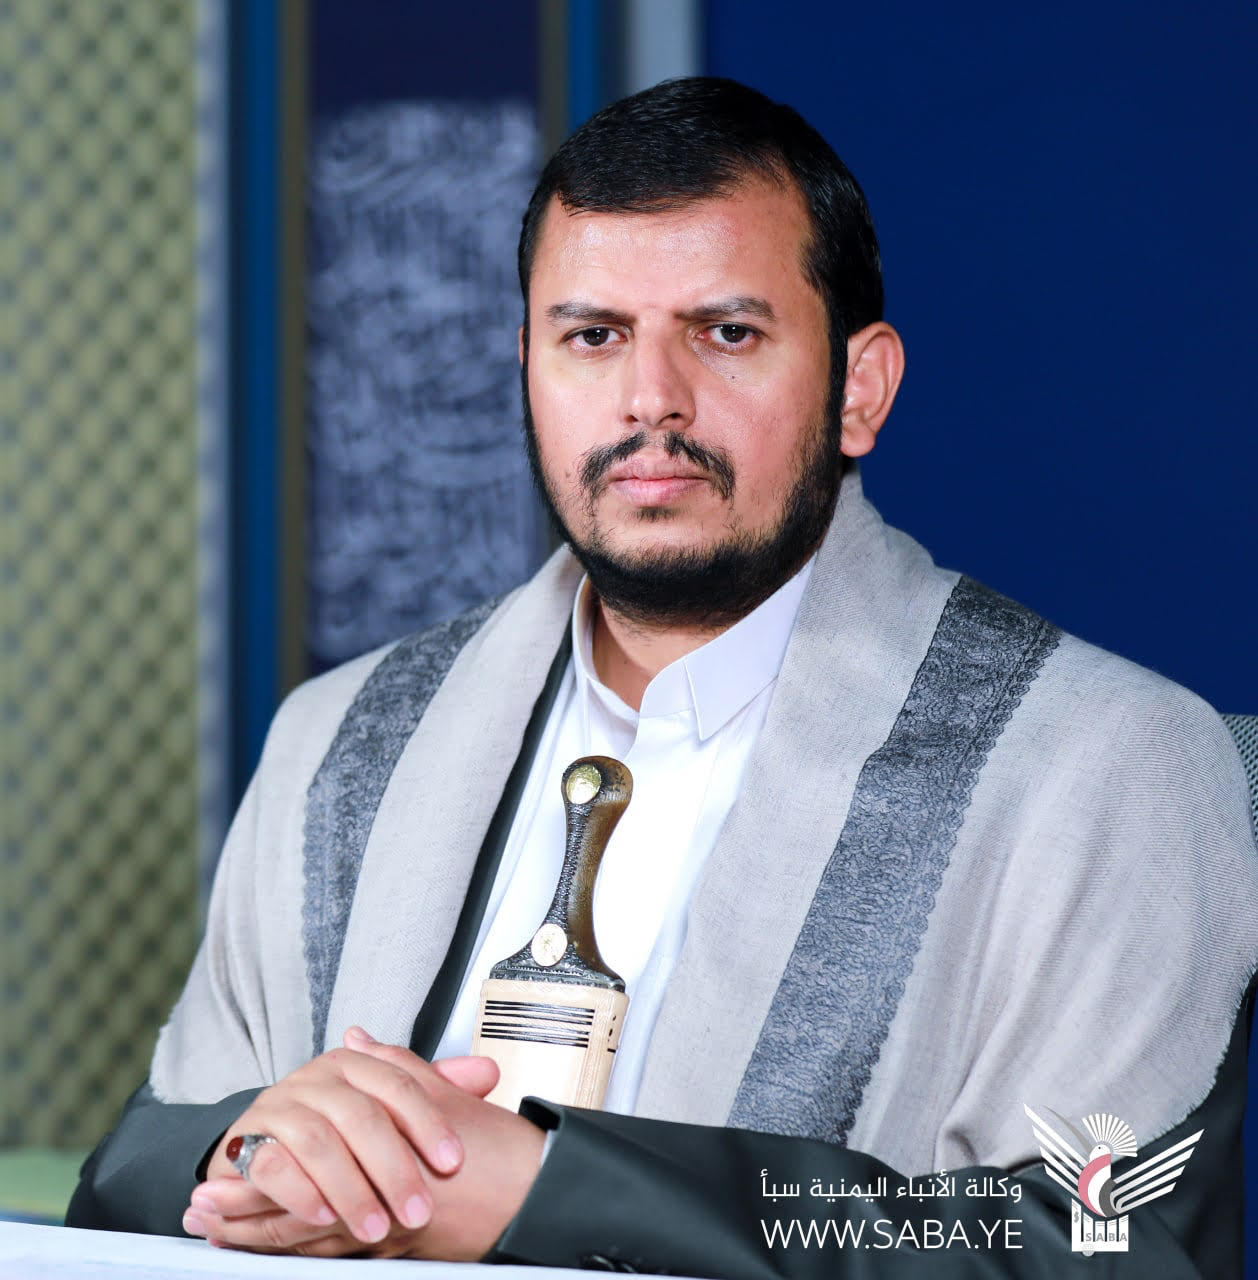 Revolution leader confirms steadfastness of Yemeni position in supporting  Palestinian people